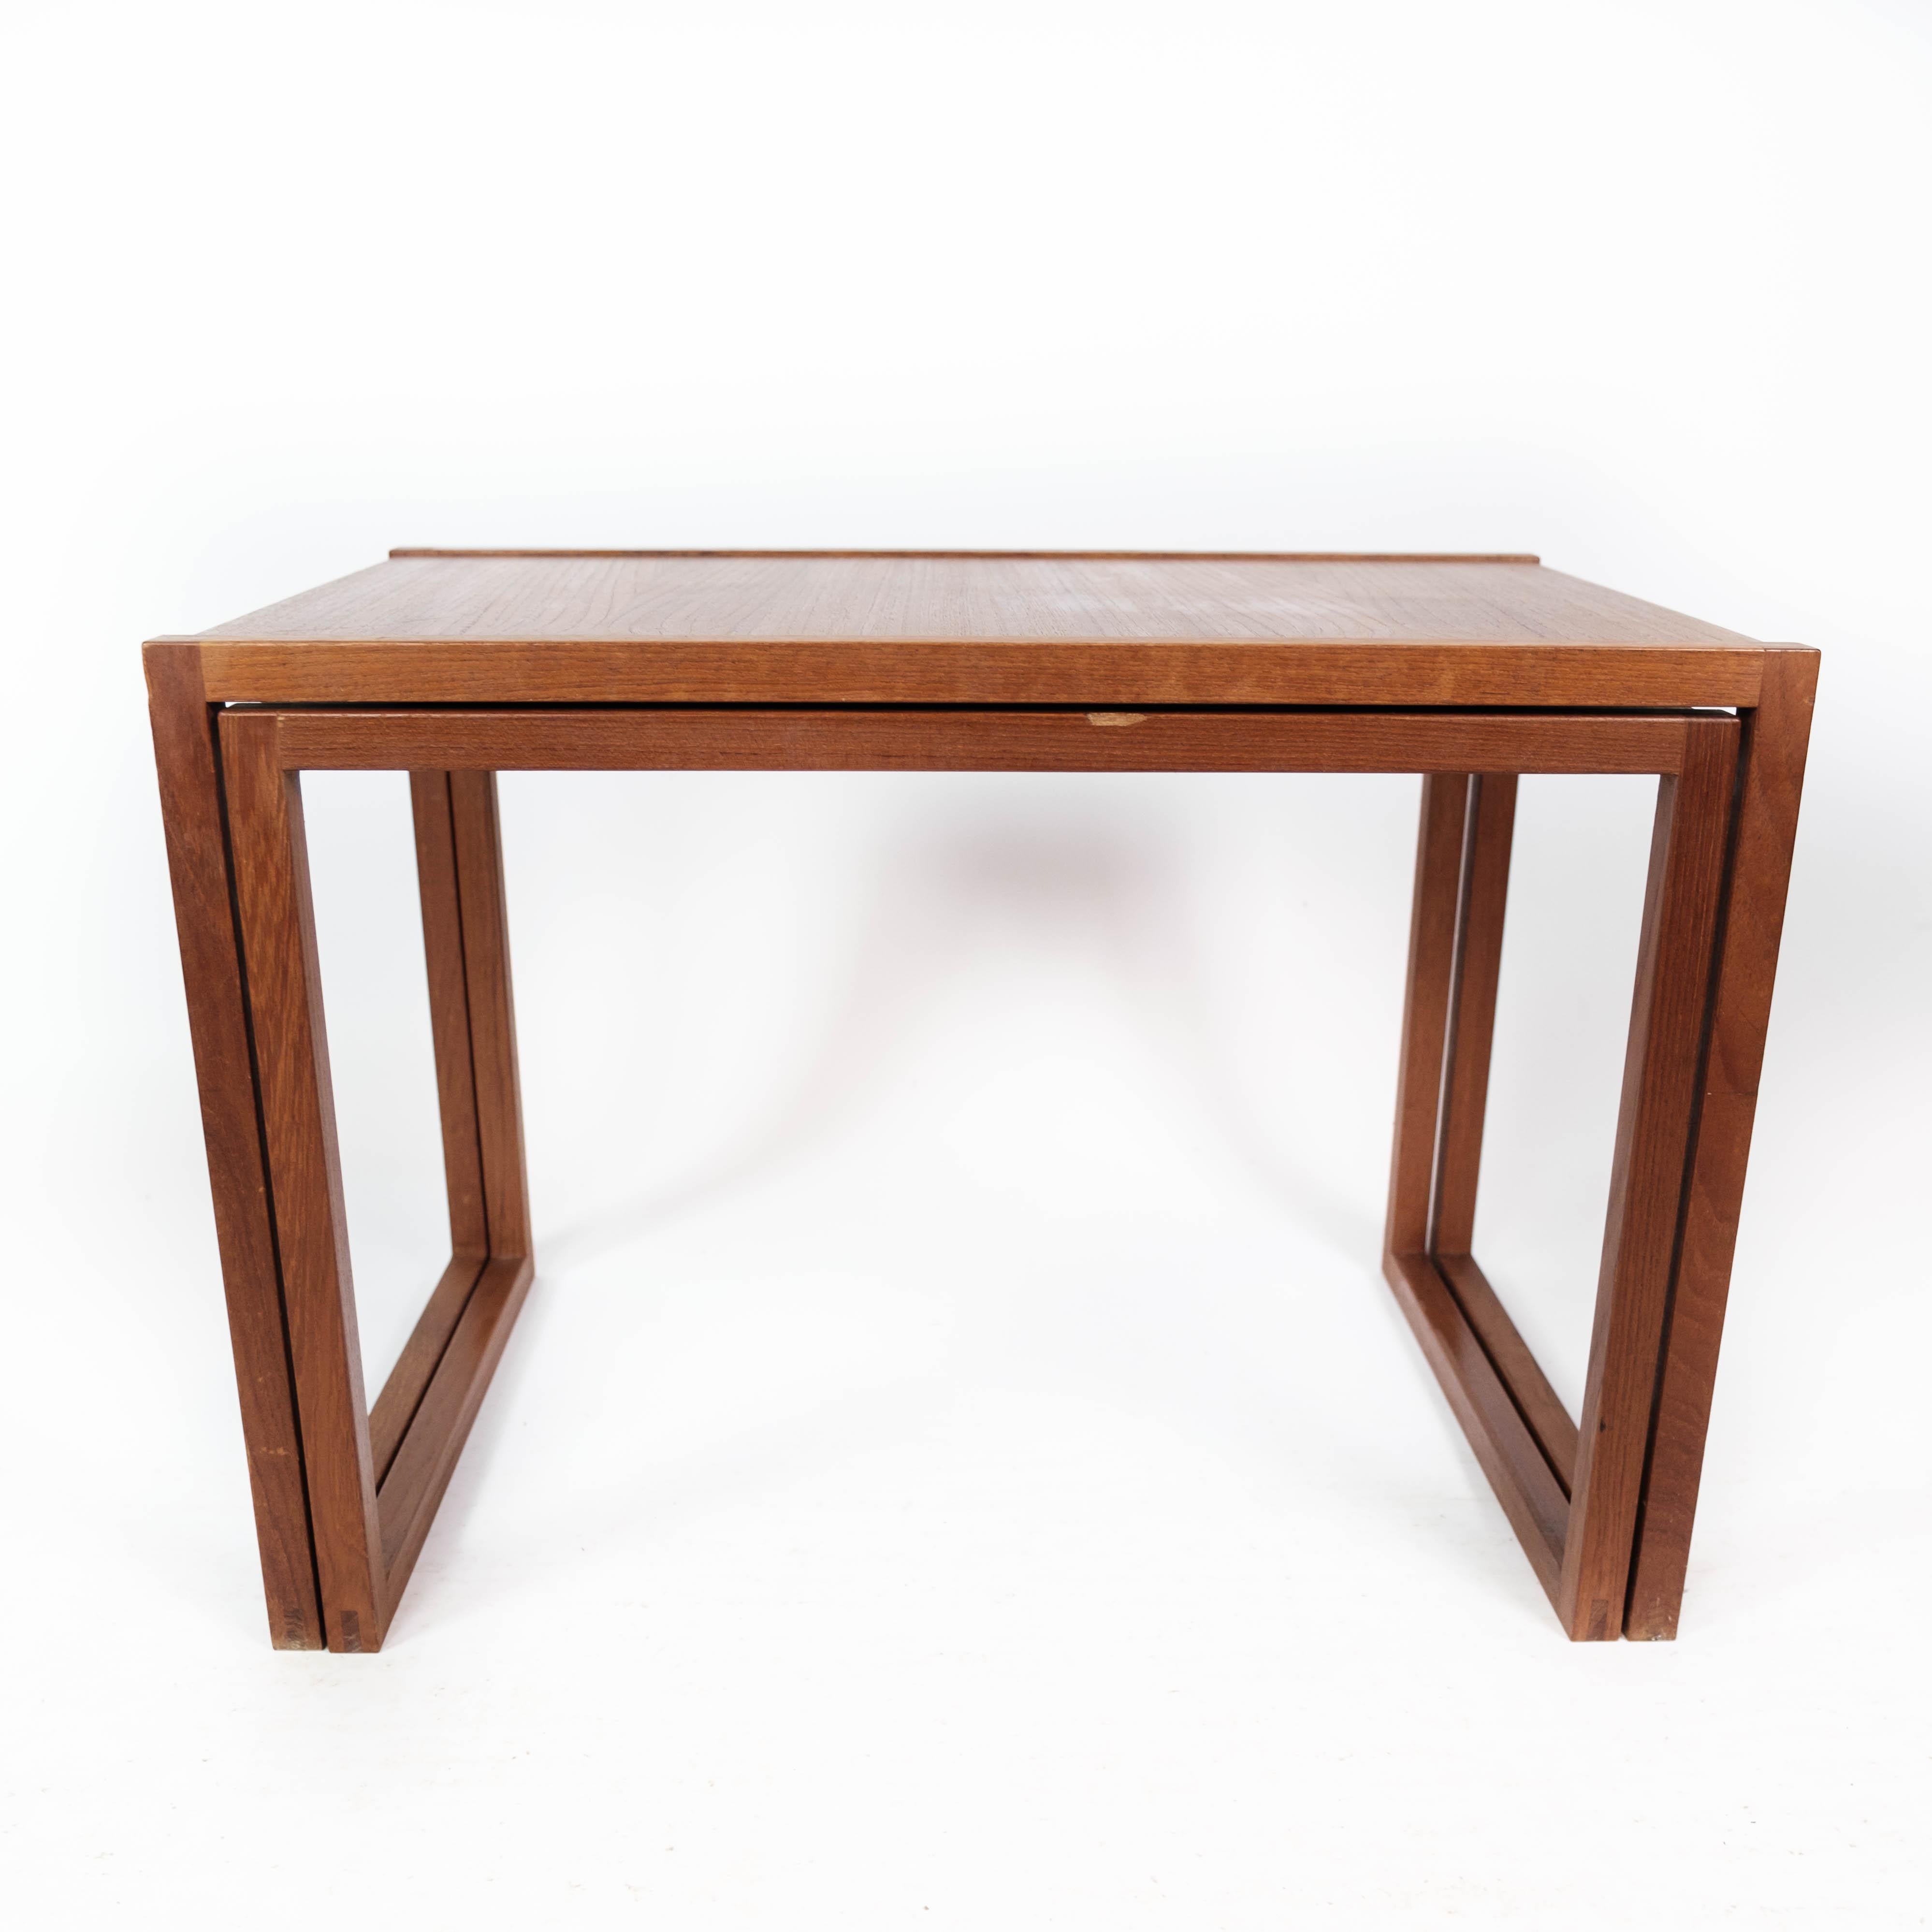 Nesting Table in Teak of Danish Design from the 1960s For Sale 10